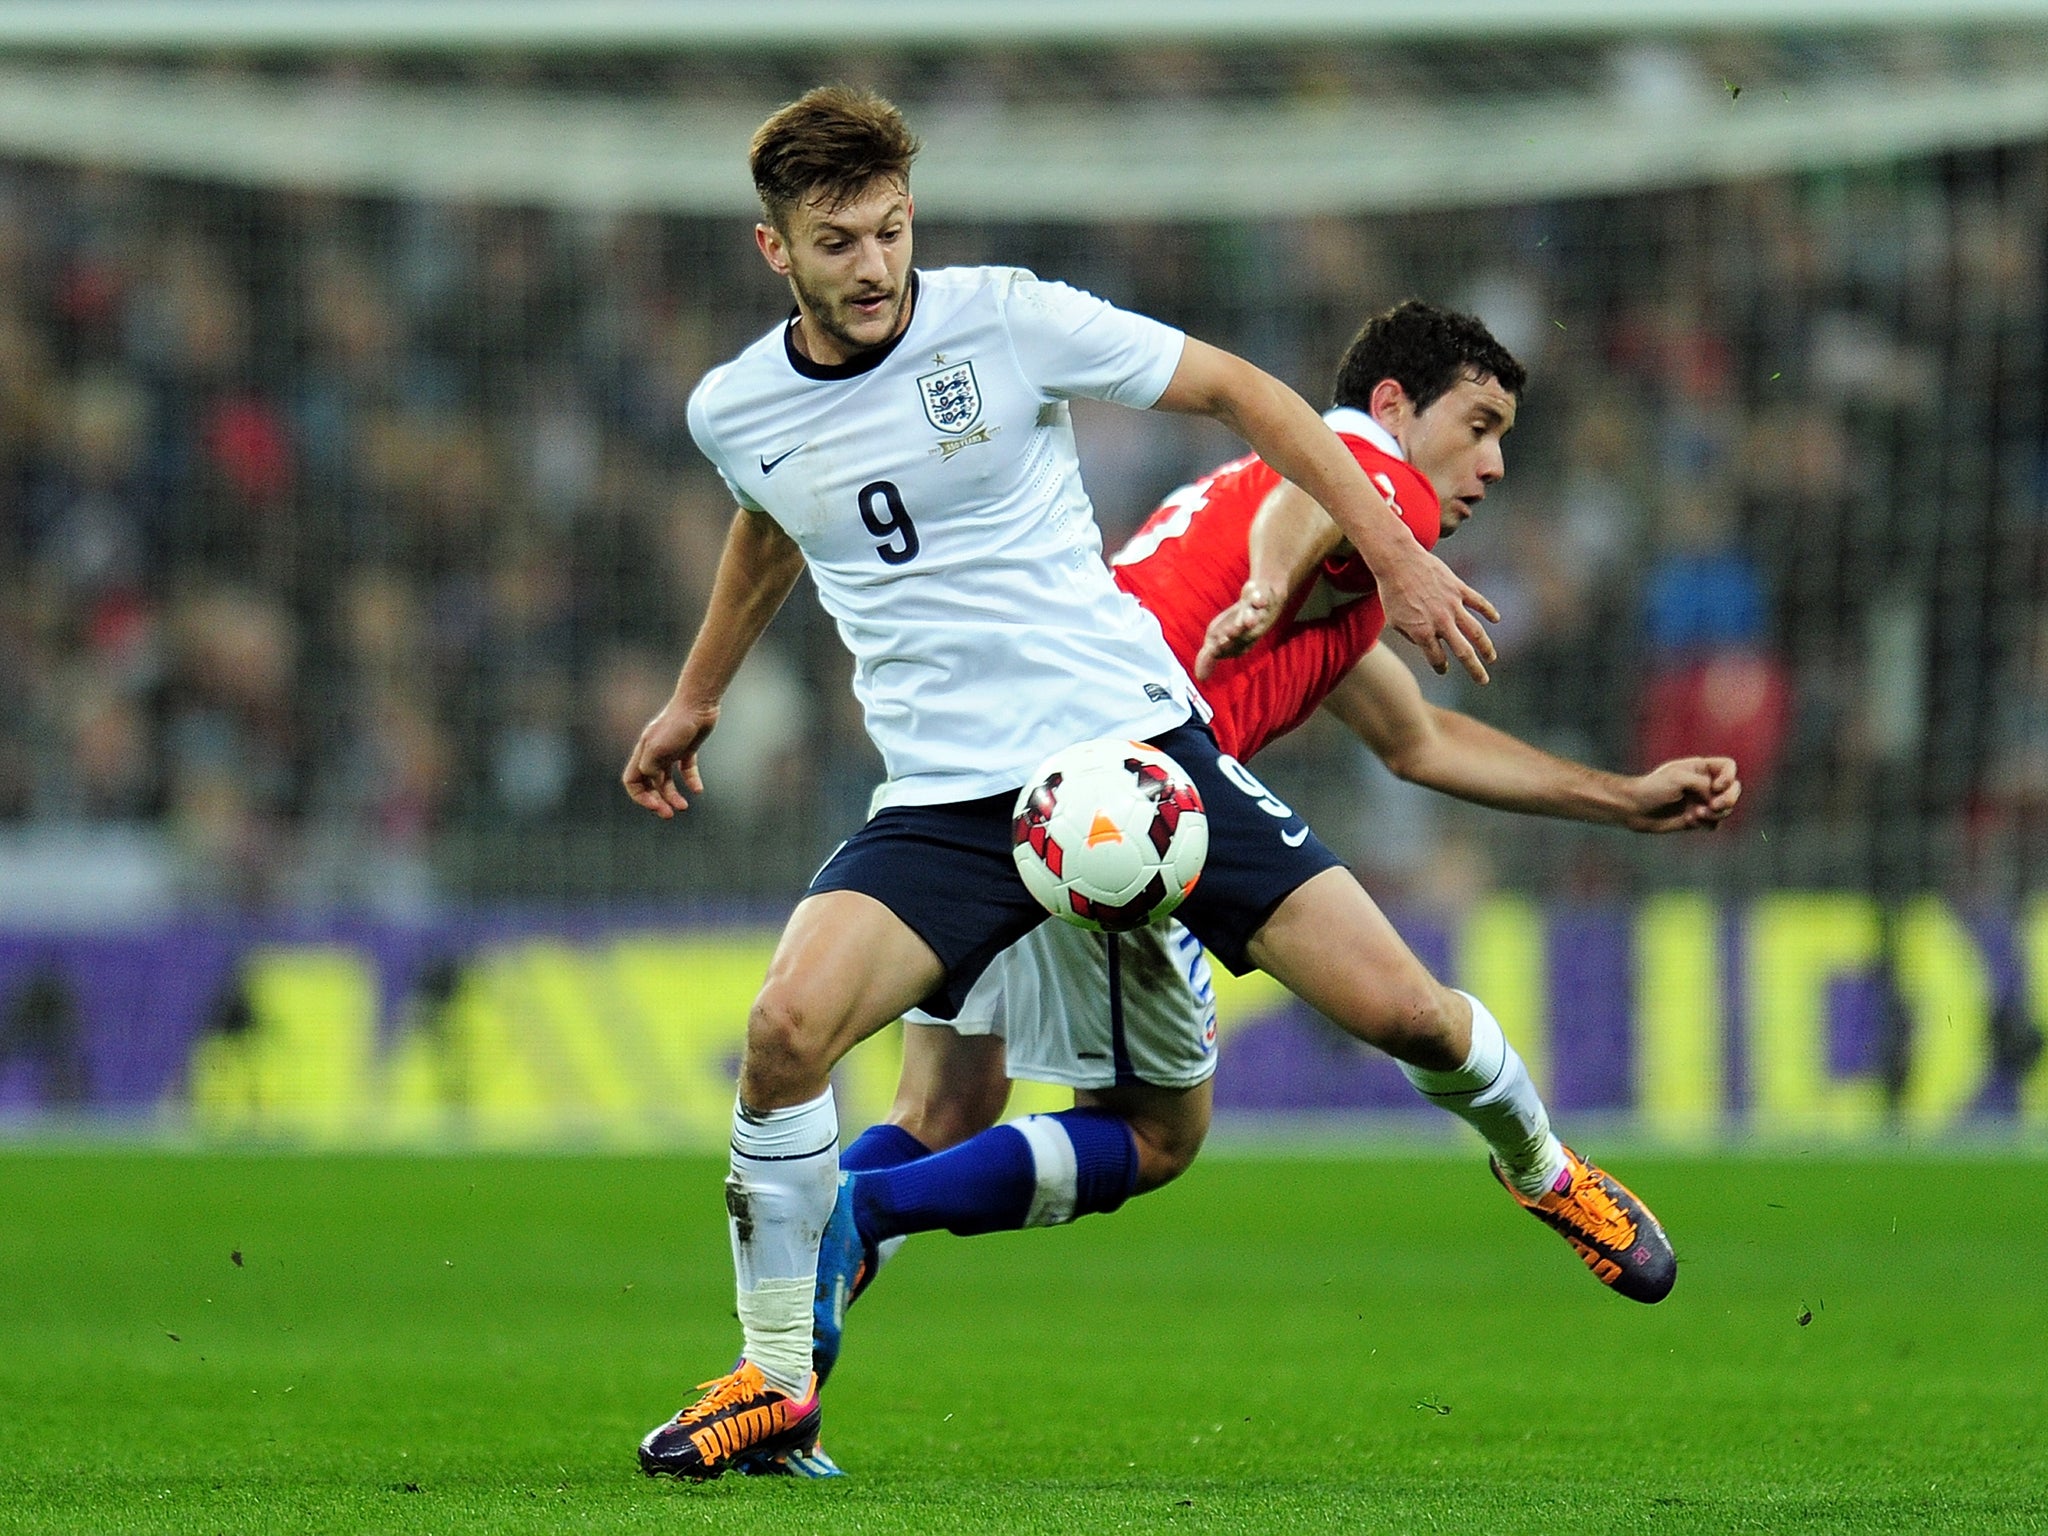 Southampton midfielder Adam Lallana made his England debut in the 2-0 defeat to Chile